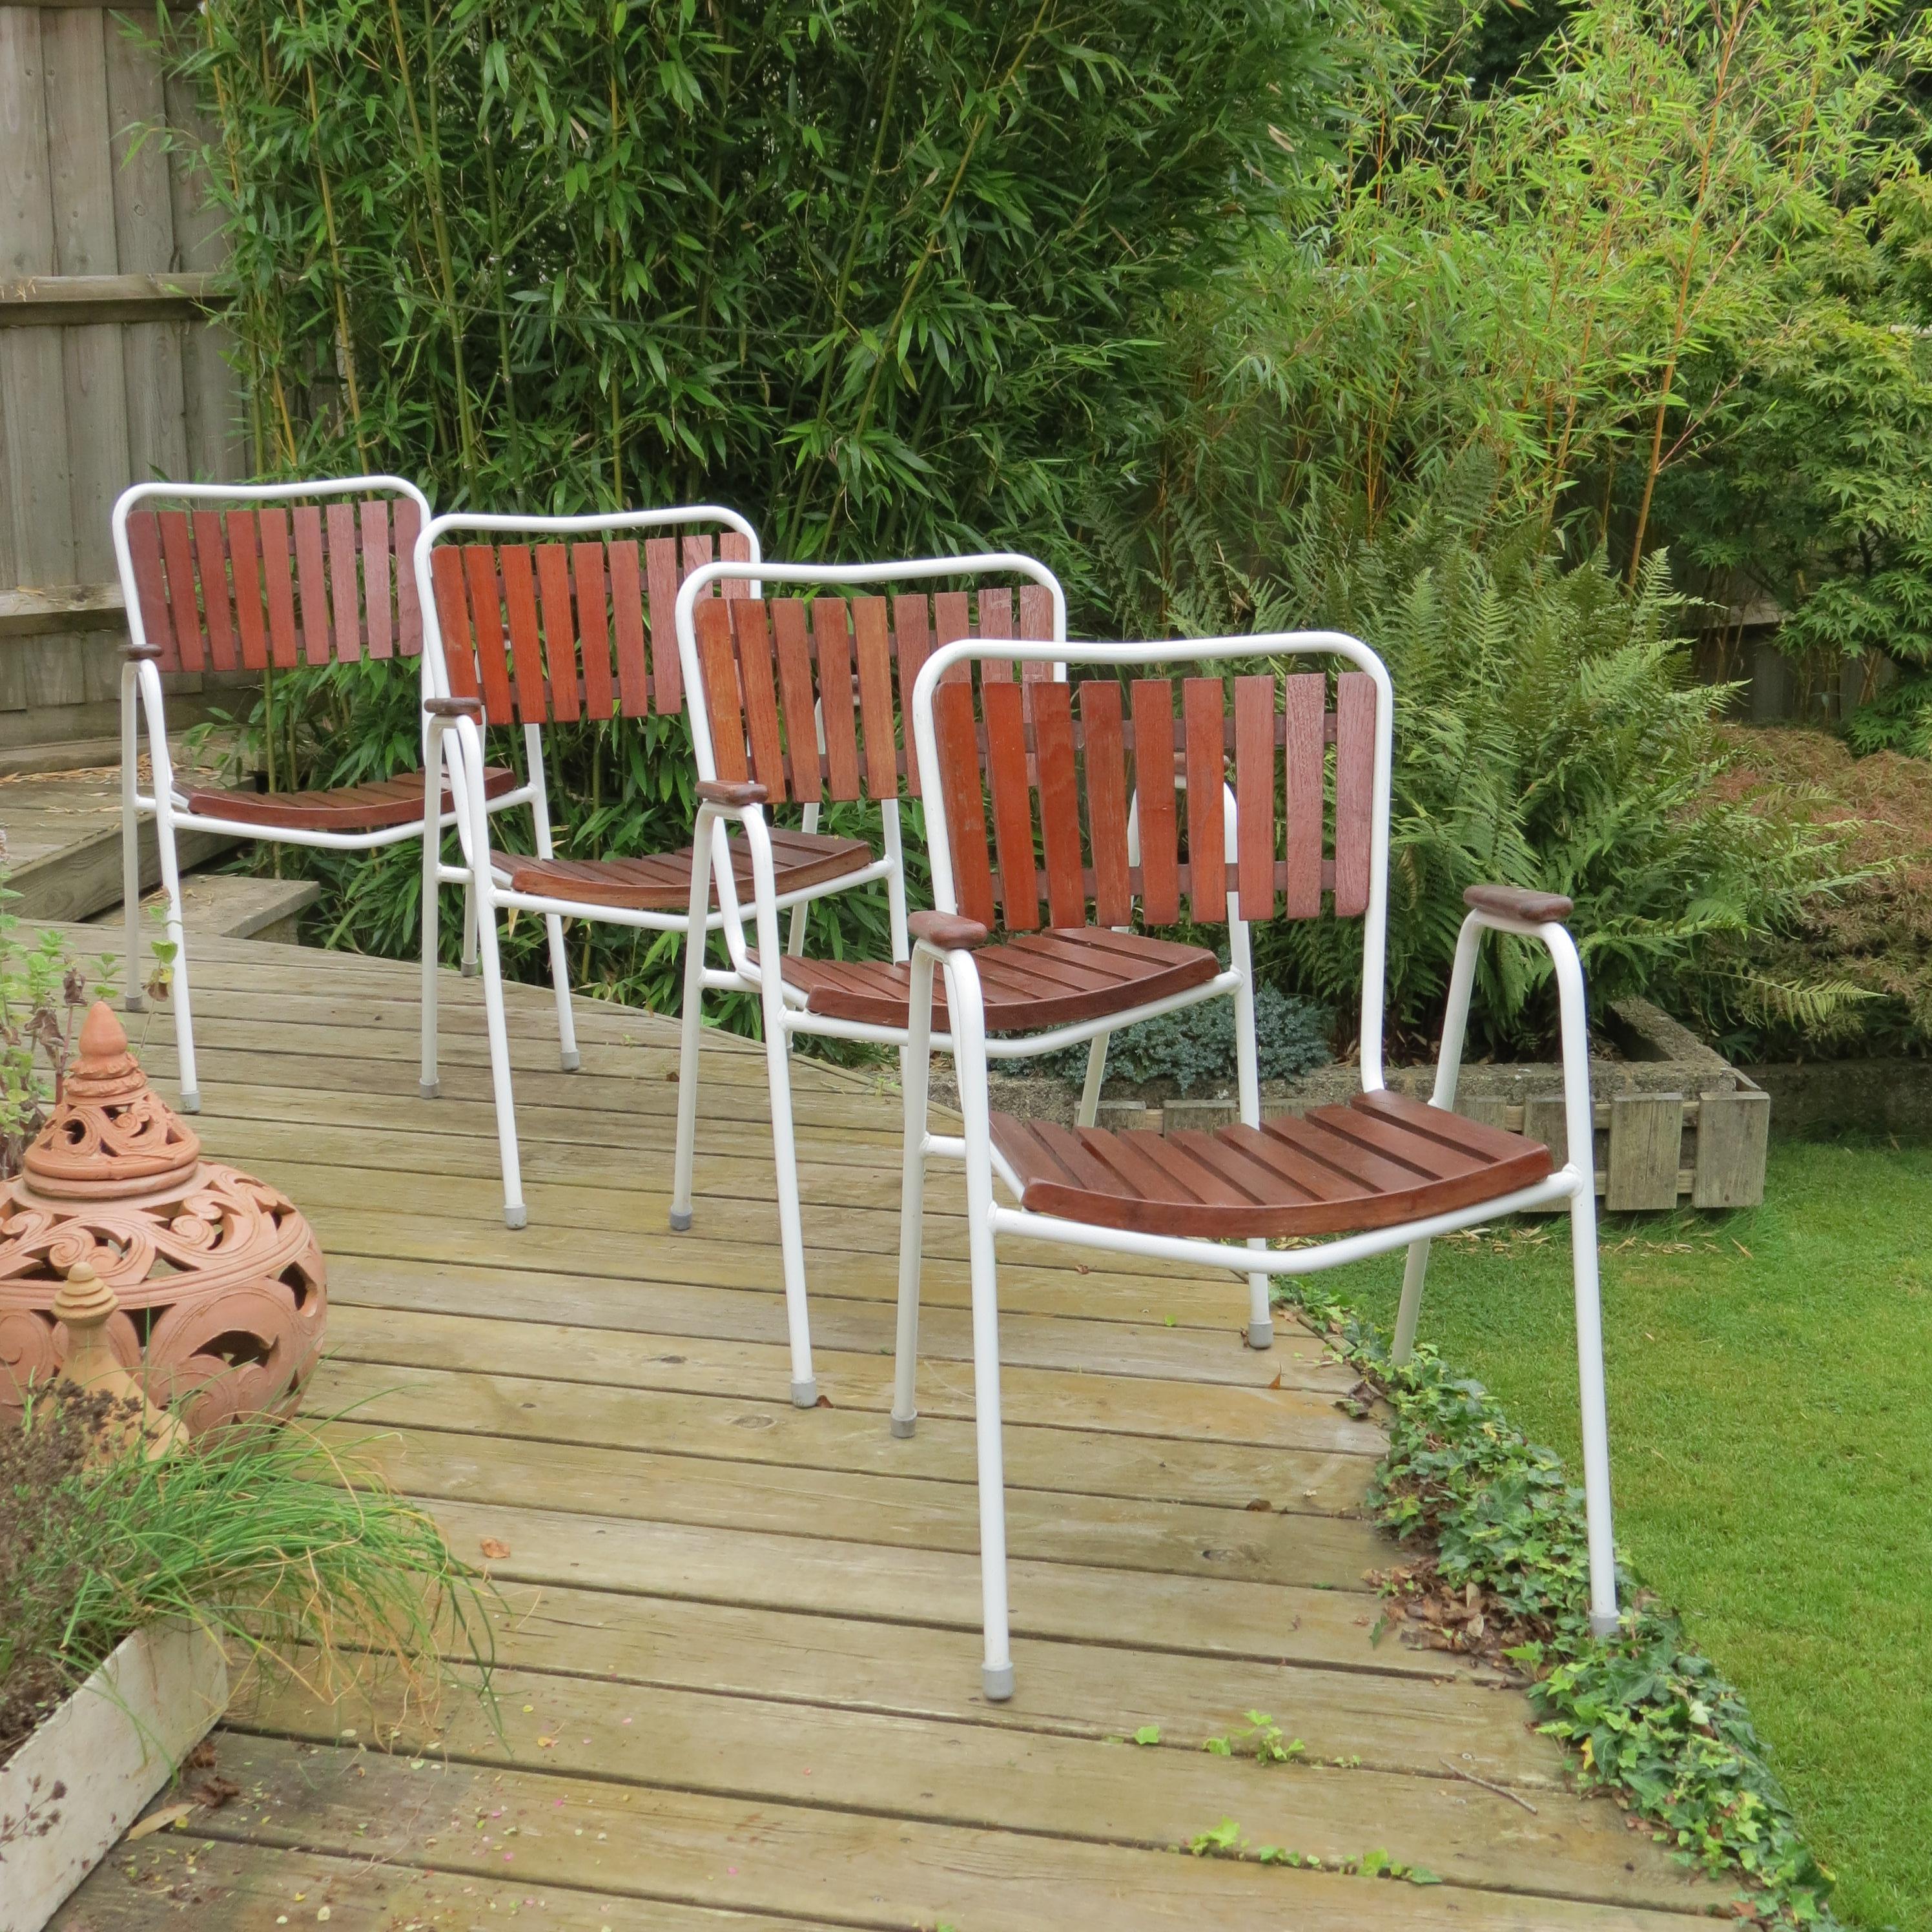 Wonderful garden set comprising four stacking garden chairs and a folding garden table.  Designed and produced by Daneline, Denmark.  

Plastic coated steel tube frames with solid Teak slatted seat and backs. The chairs stack and the table legs fold